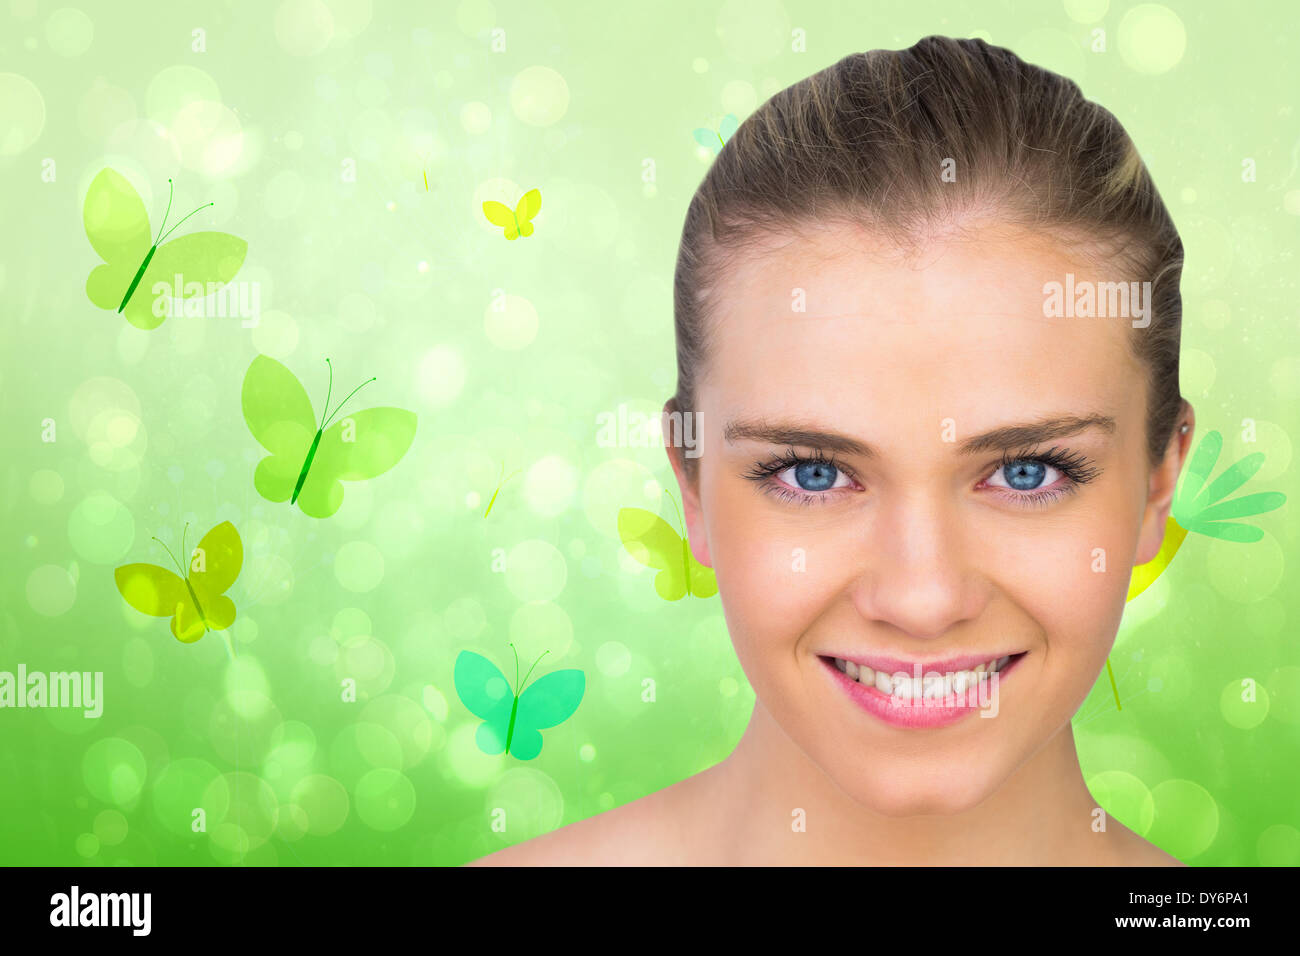 Composite image of smiling blonde natural beauty Stock Photo